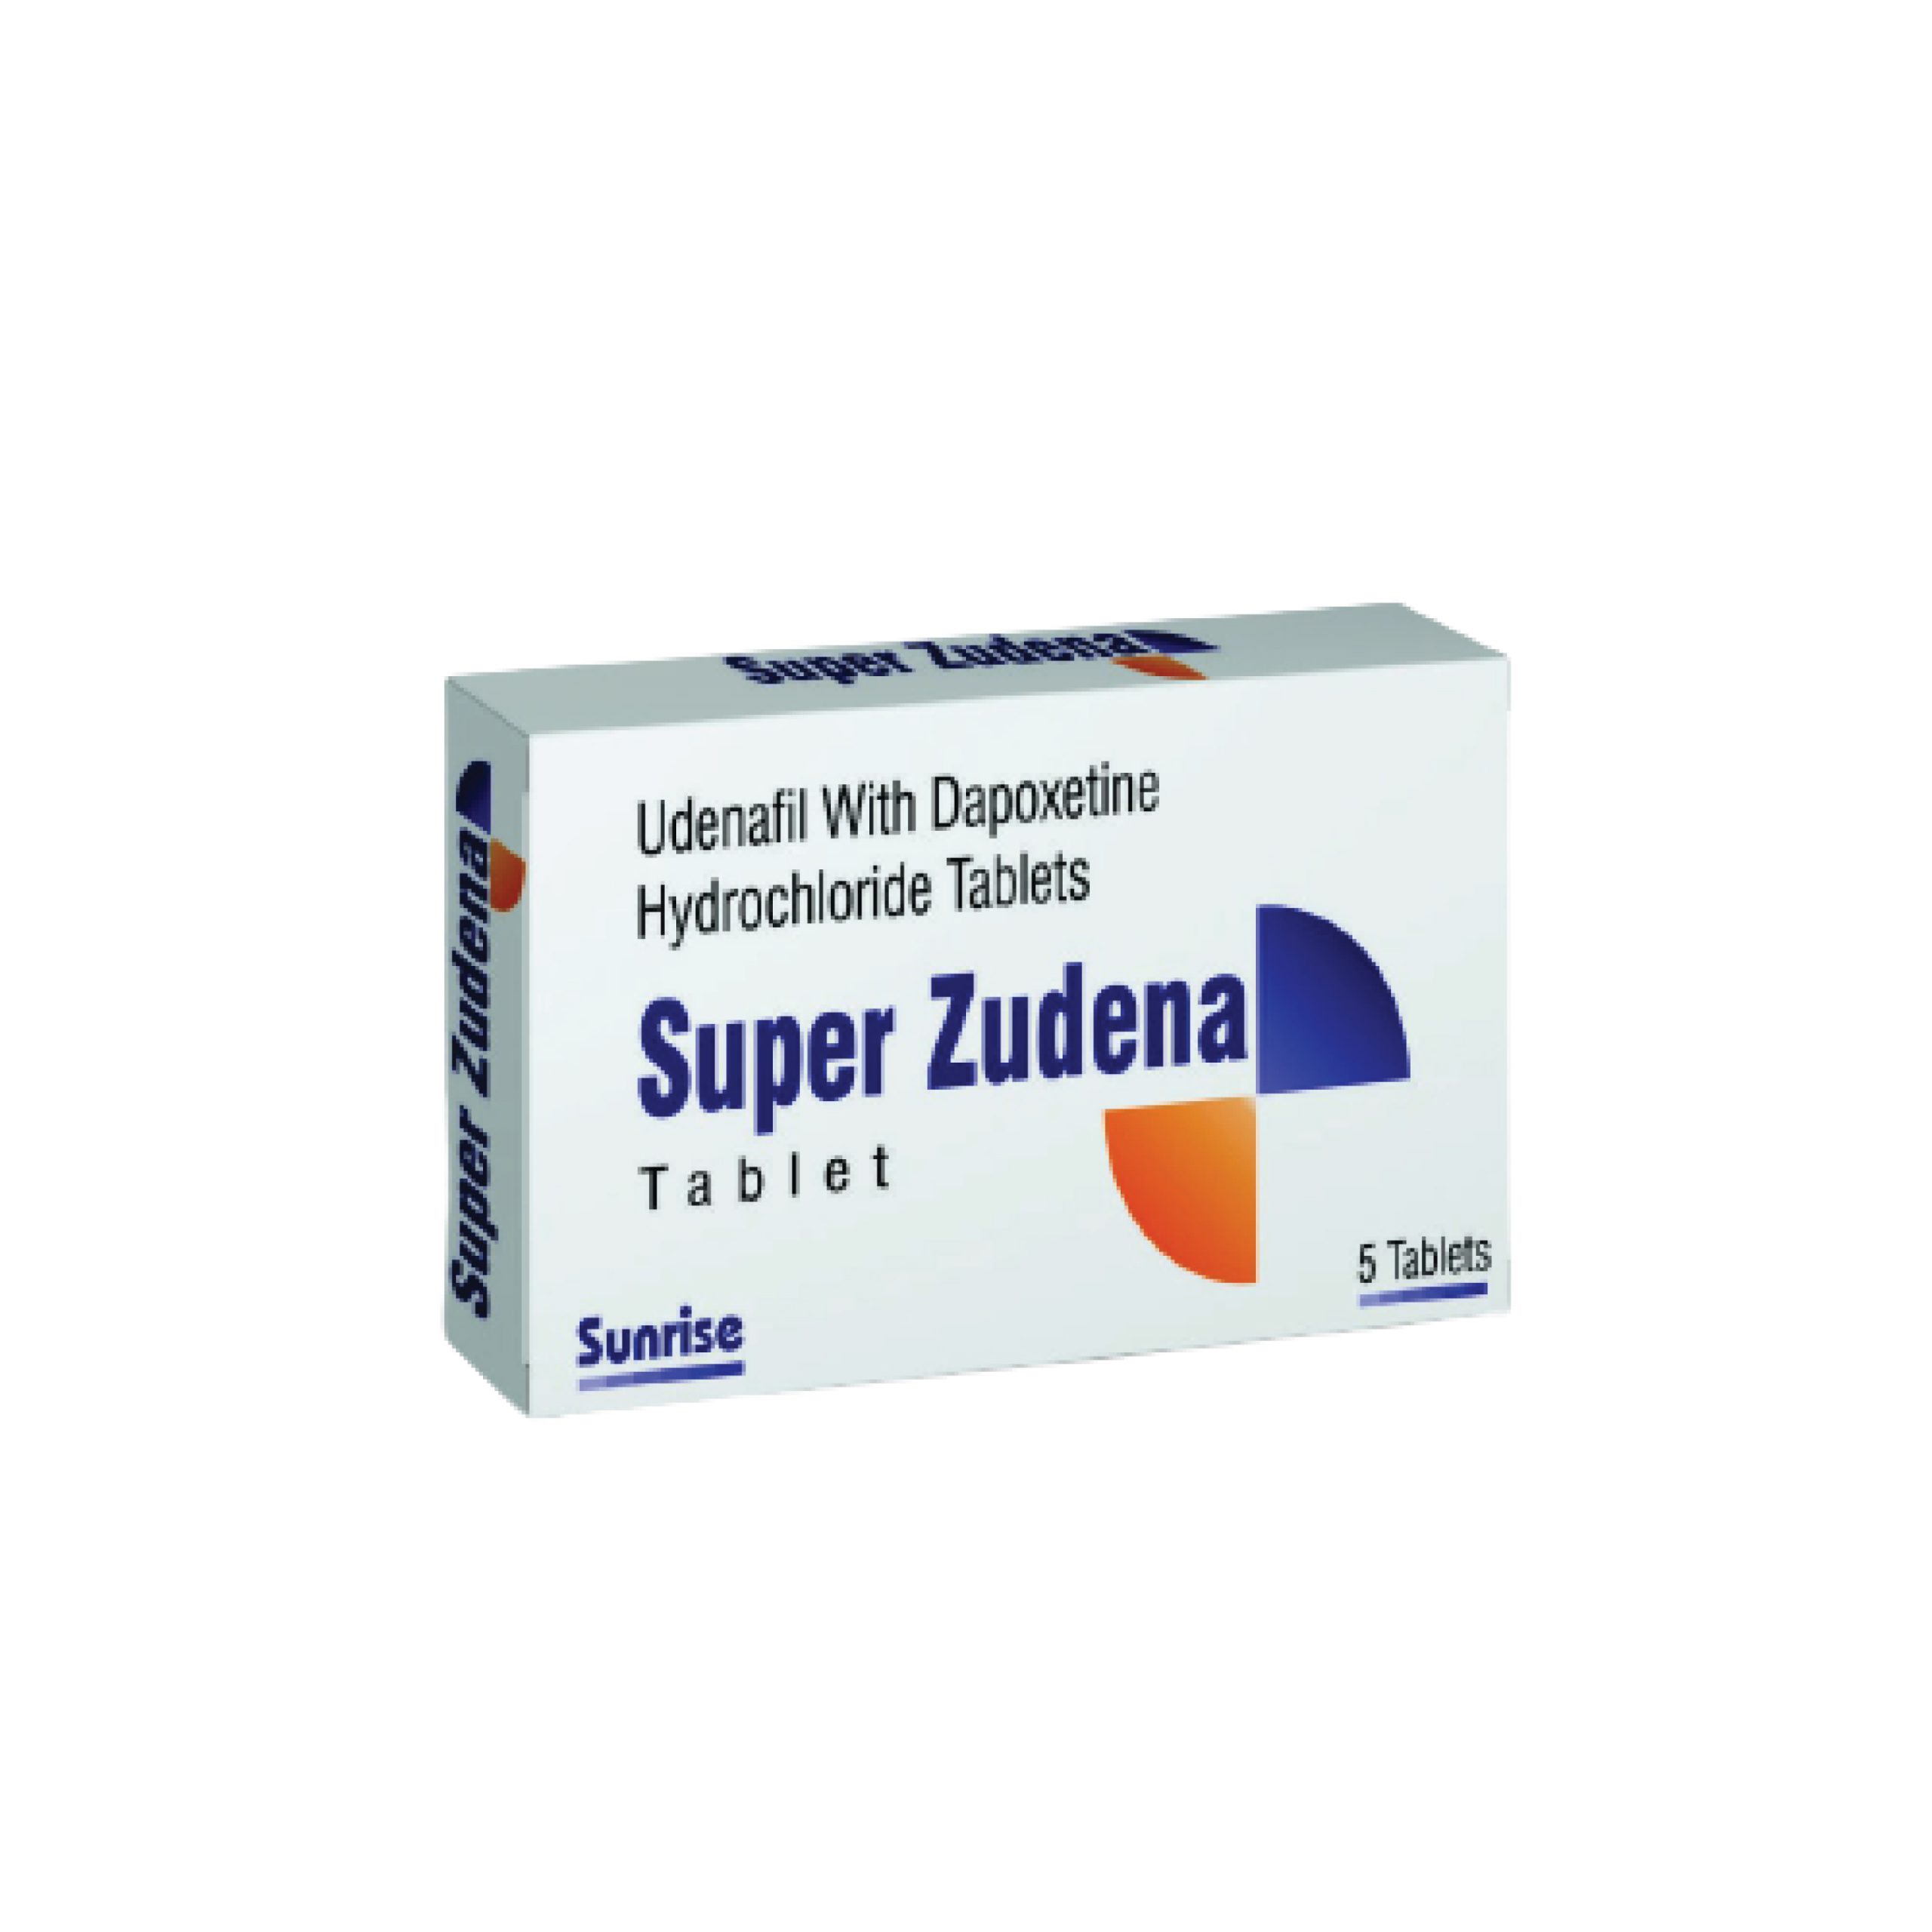 Combination tablet for Erectile Dysfunction and Premature Ejaculation. Contains dual powerful Udenafil 100mg &amp; Dapoxetine 60mg